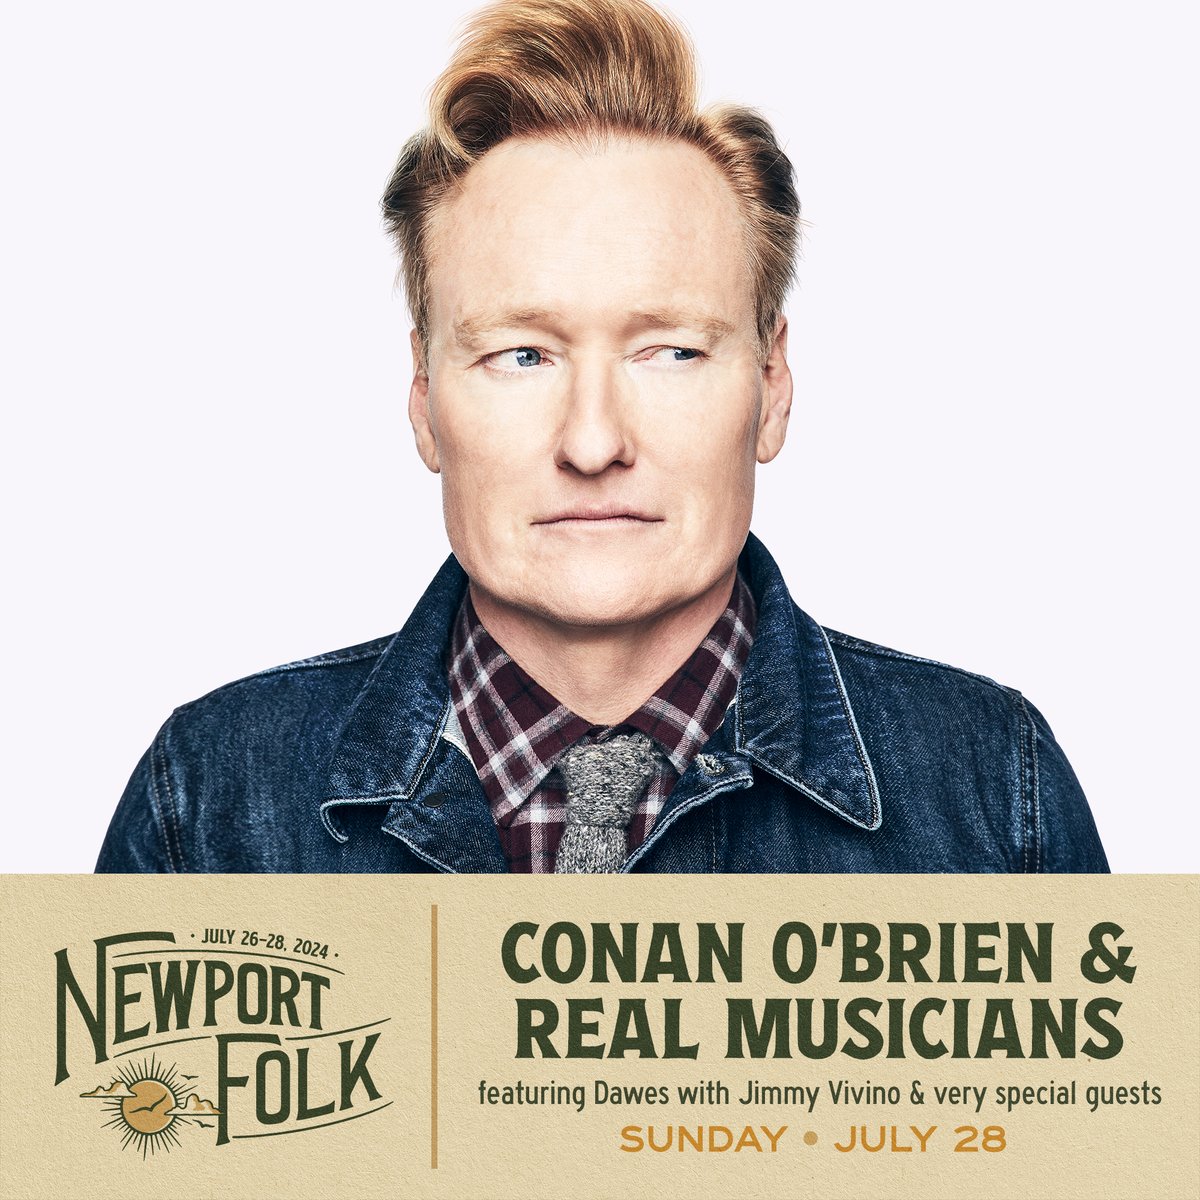 Please welcome 'Conan O'Brien & Real Musicians featuring Dawes w/ Jimmy Vivino & very special guests' to this summer's Newport Folk lineup. On Conan's behalf, @newportfestsorg has provided a grant to Brookline Teen Center in his hometown of Brookline, MA. @TeamCoco